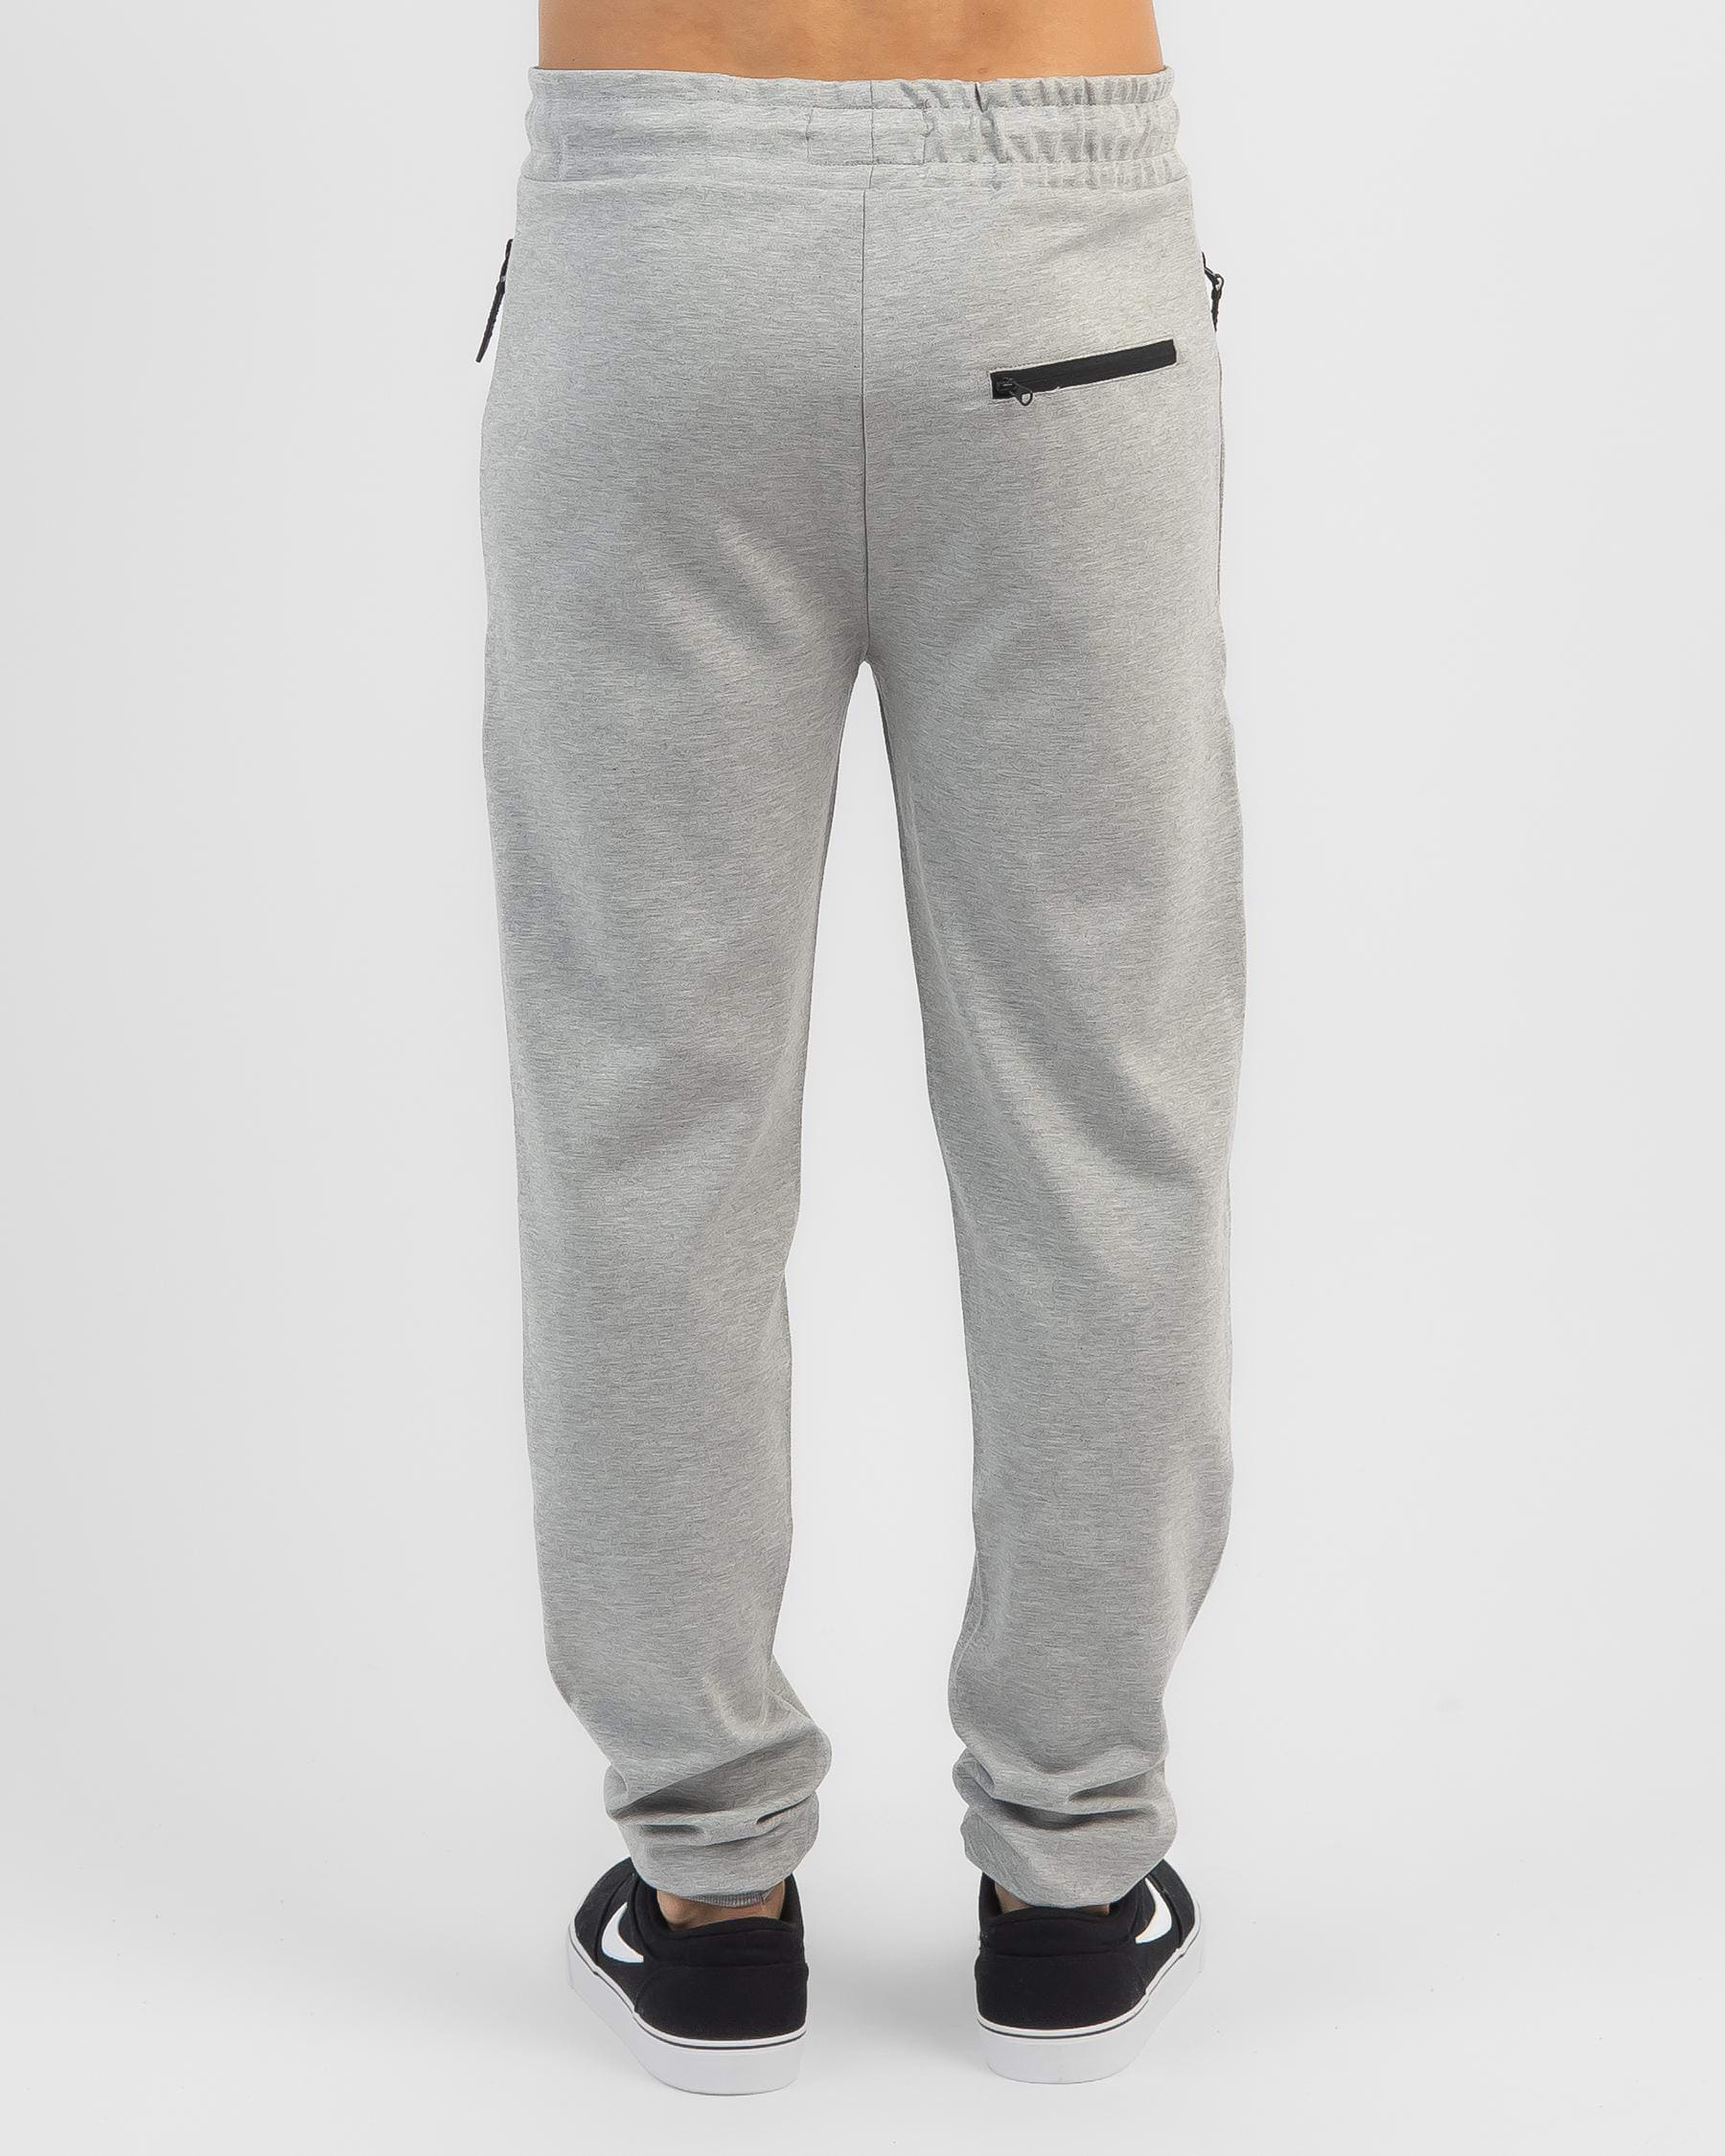 Lucid Compose Track Pants In Light Grey Marle - Fast Shipping & Easy ...